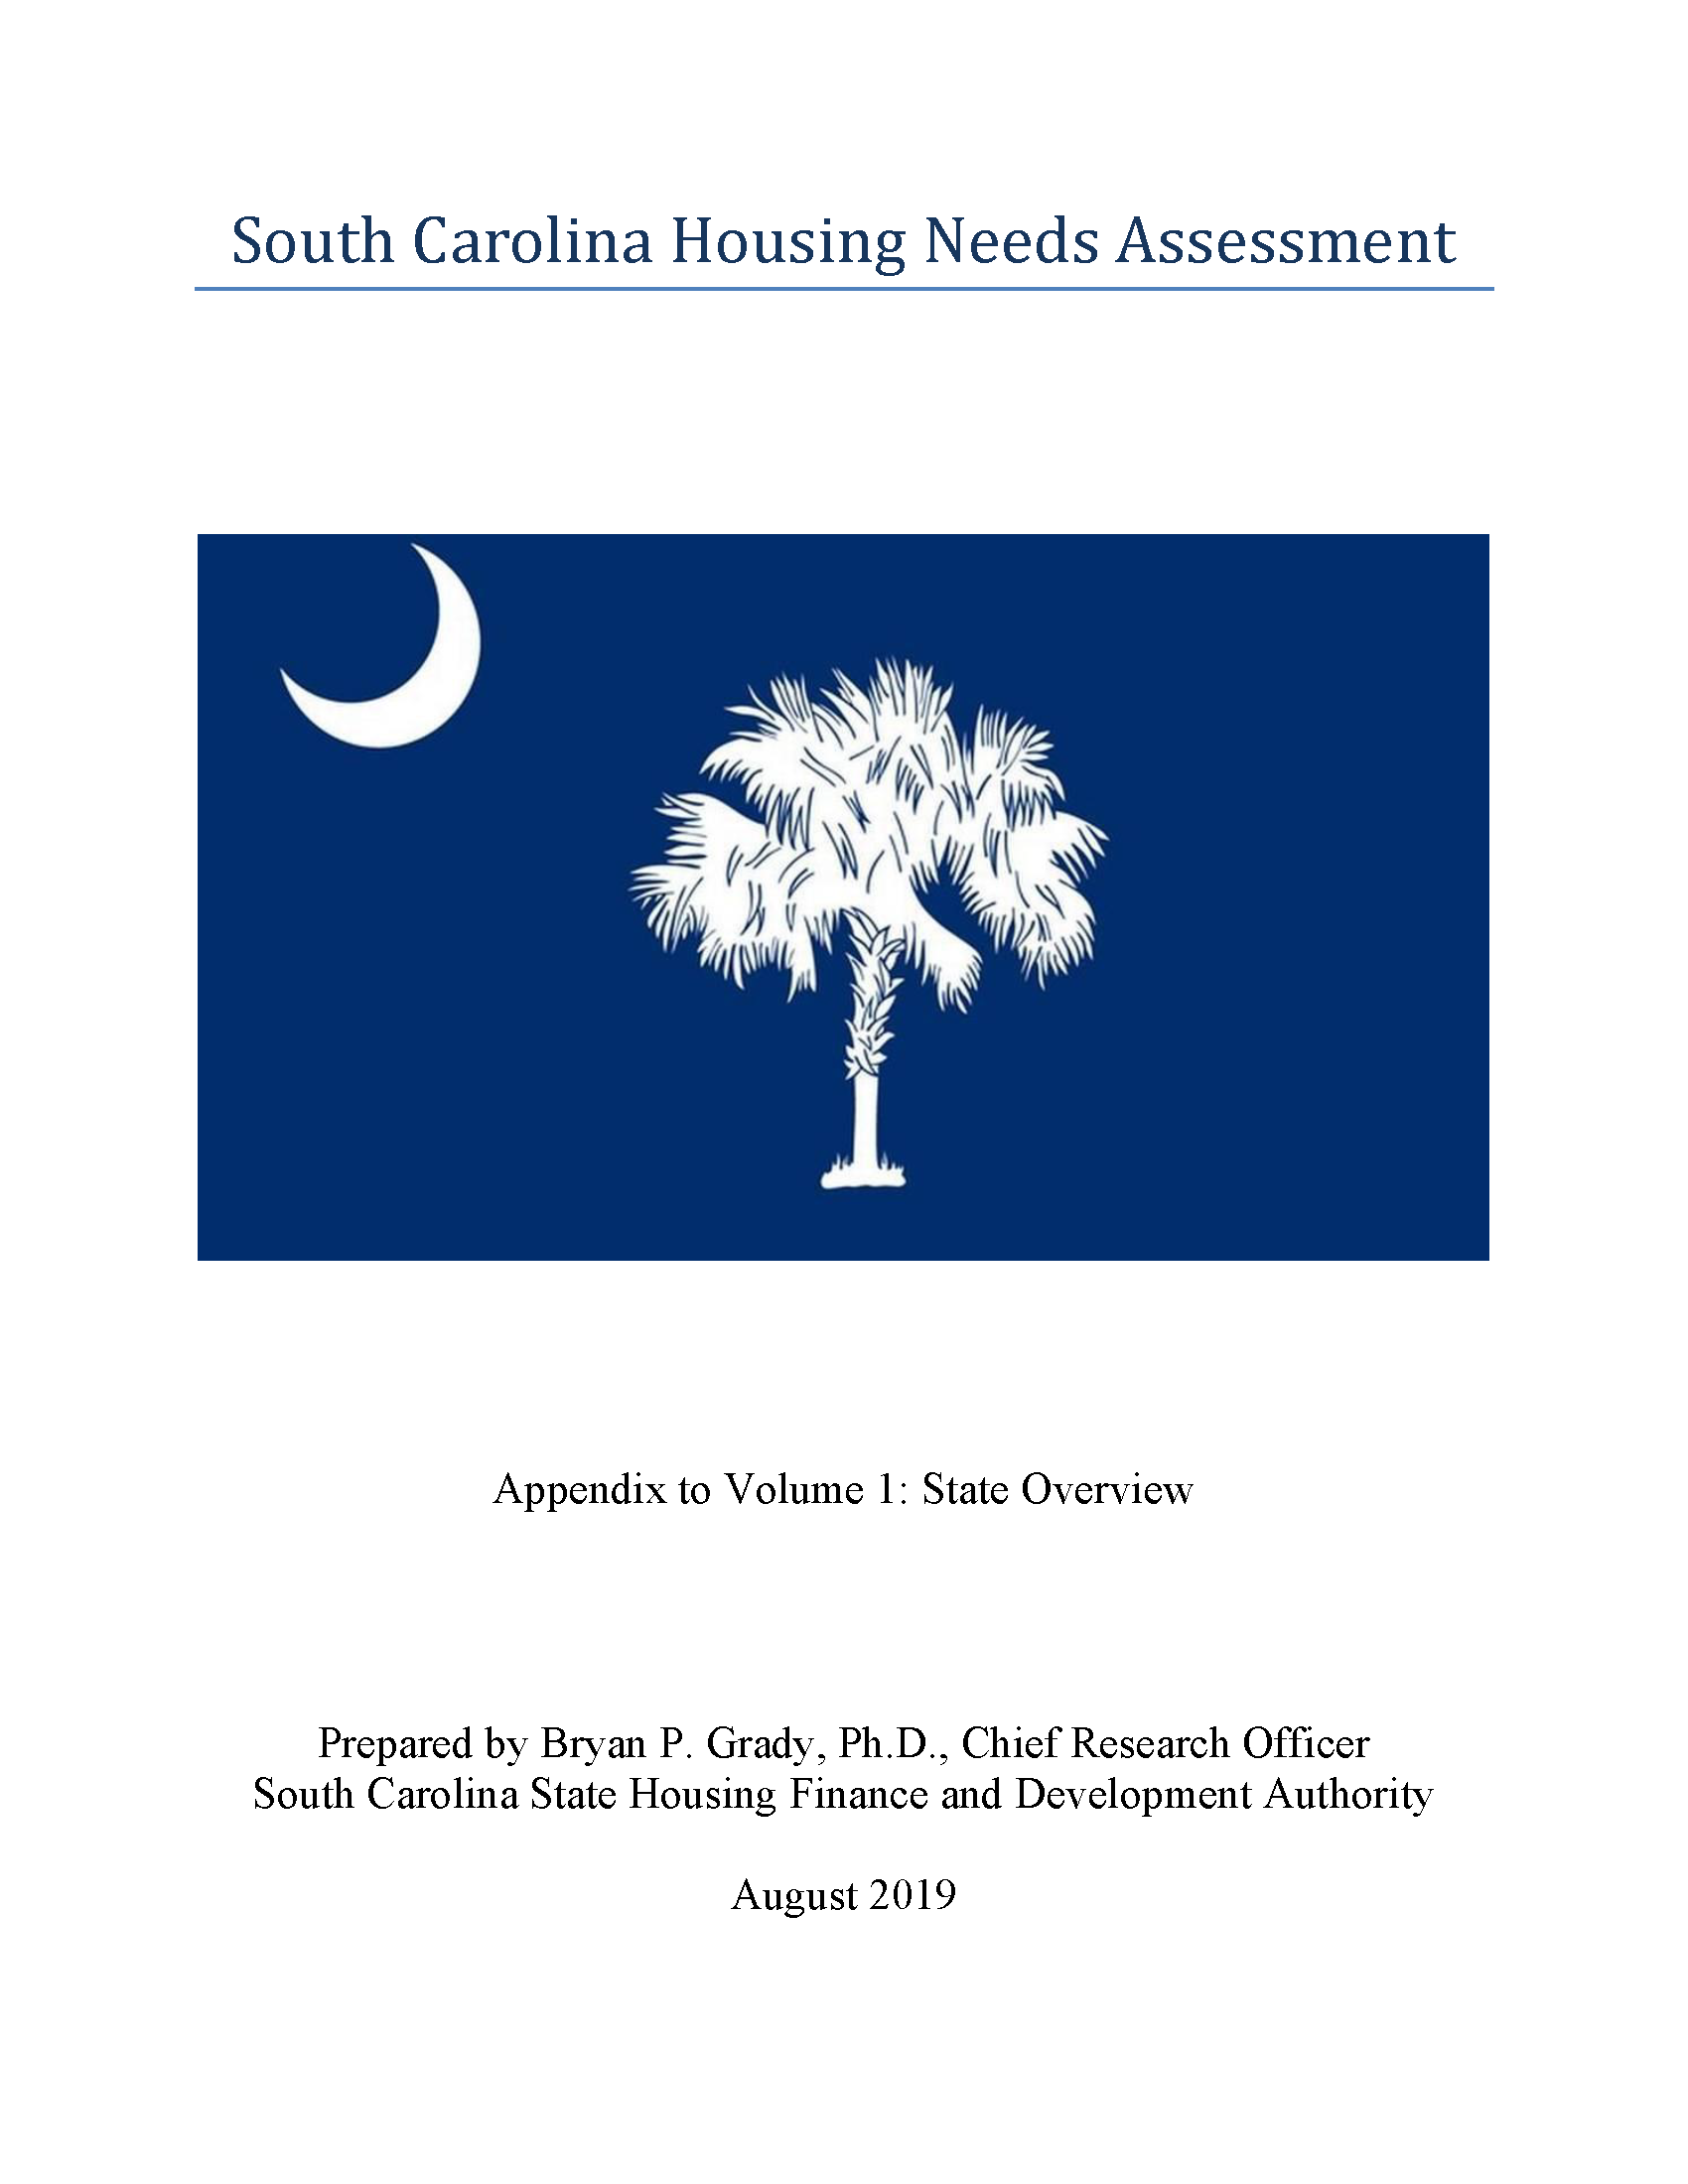 Palmetto State Housing Study for 2019